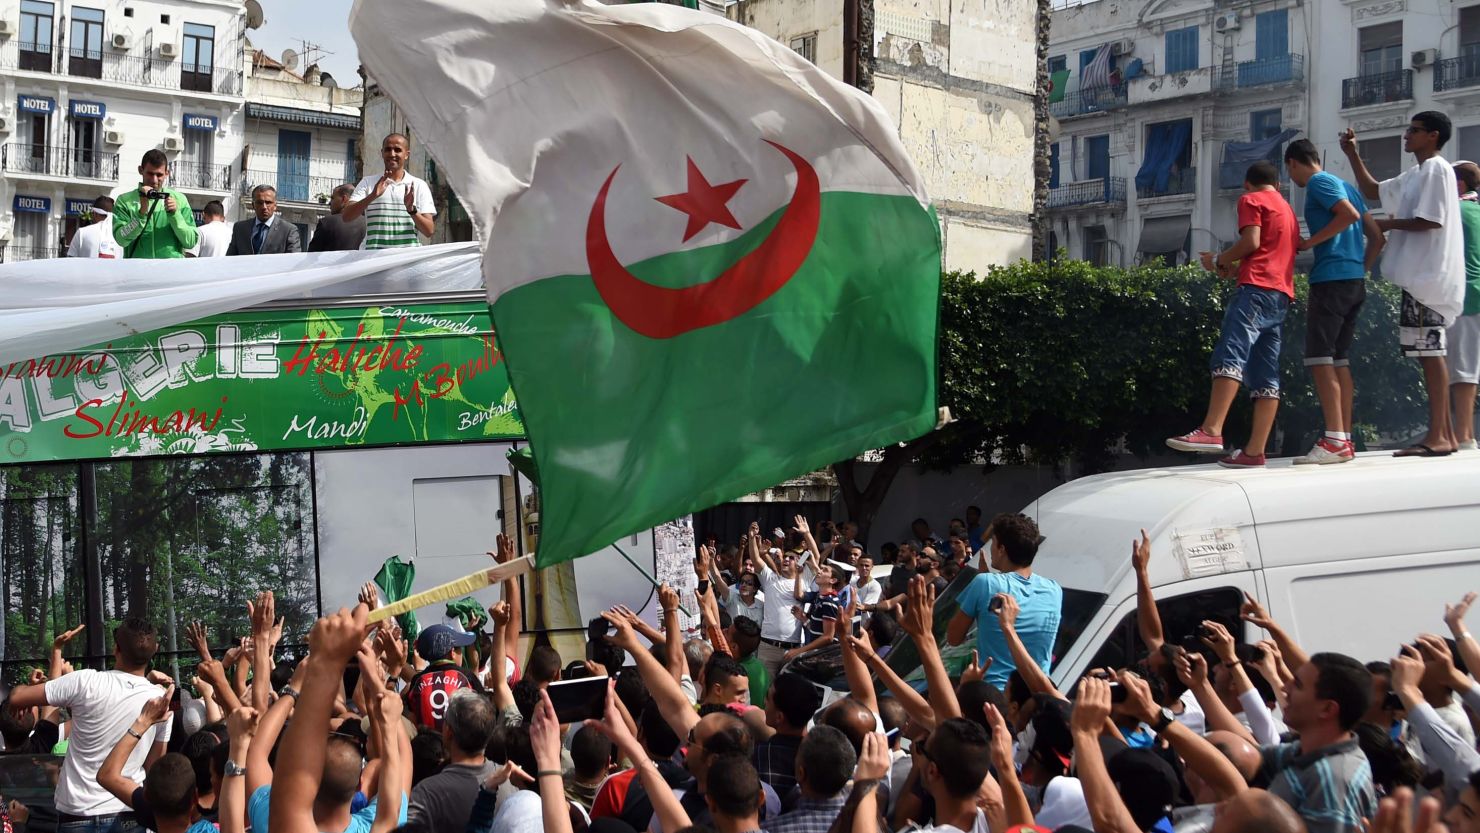 The Algerian national team was given a heroes' welcome after returning from the World Cup